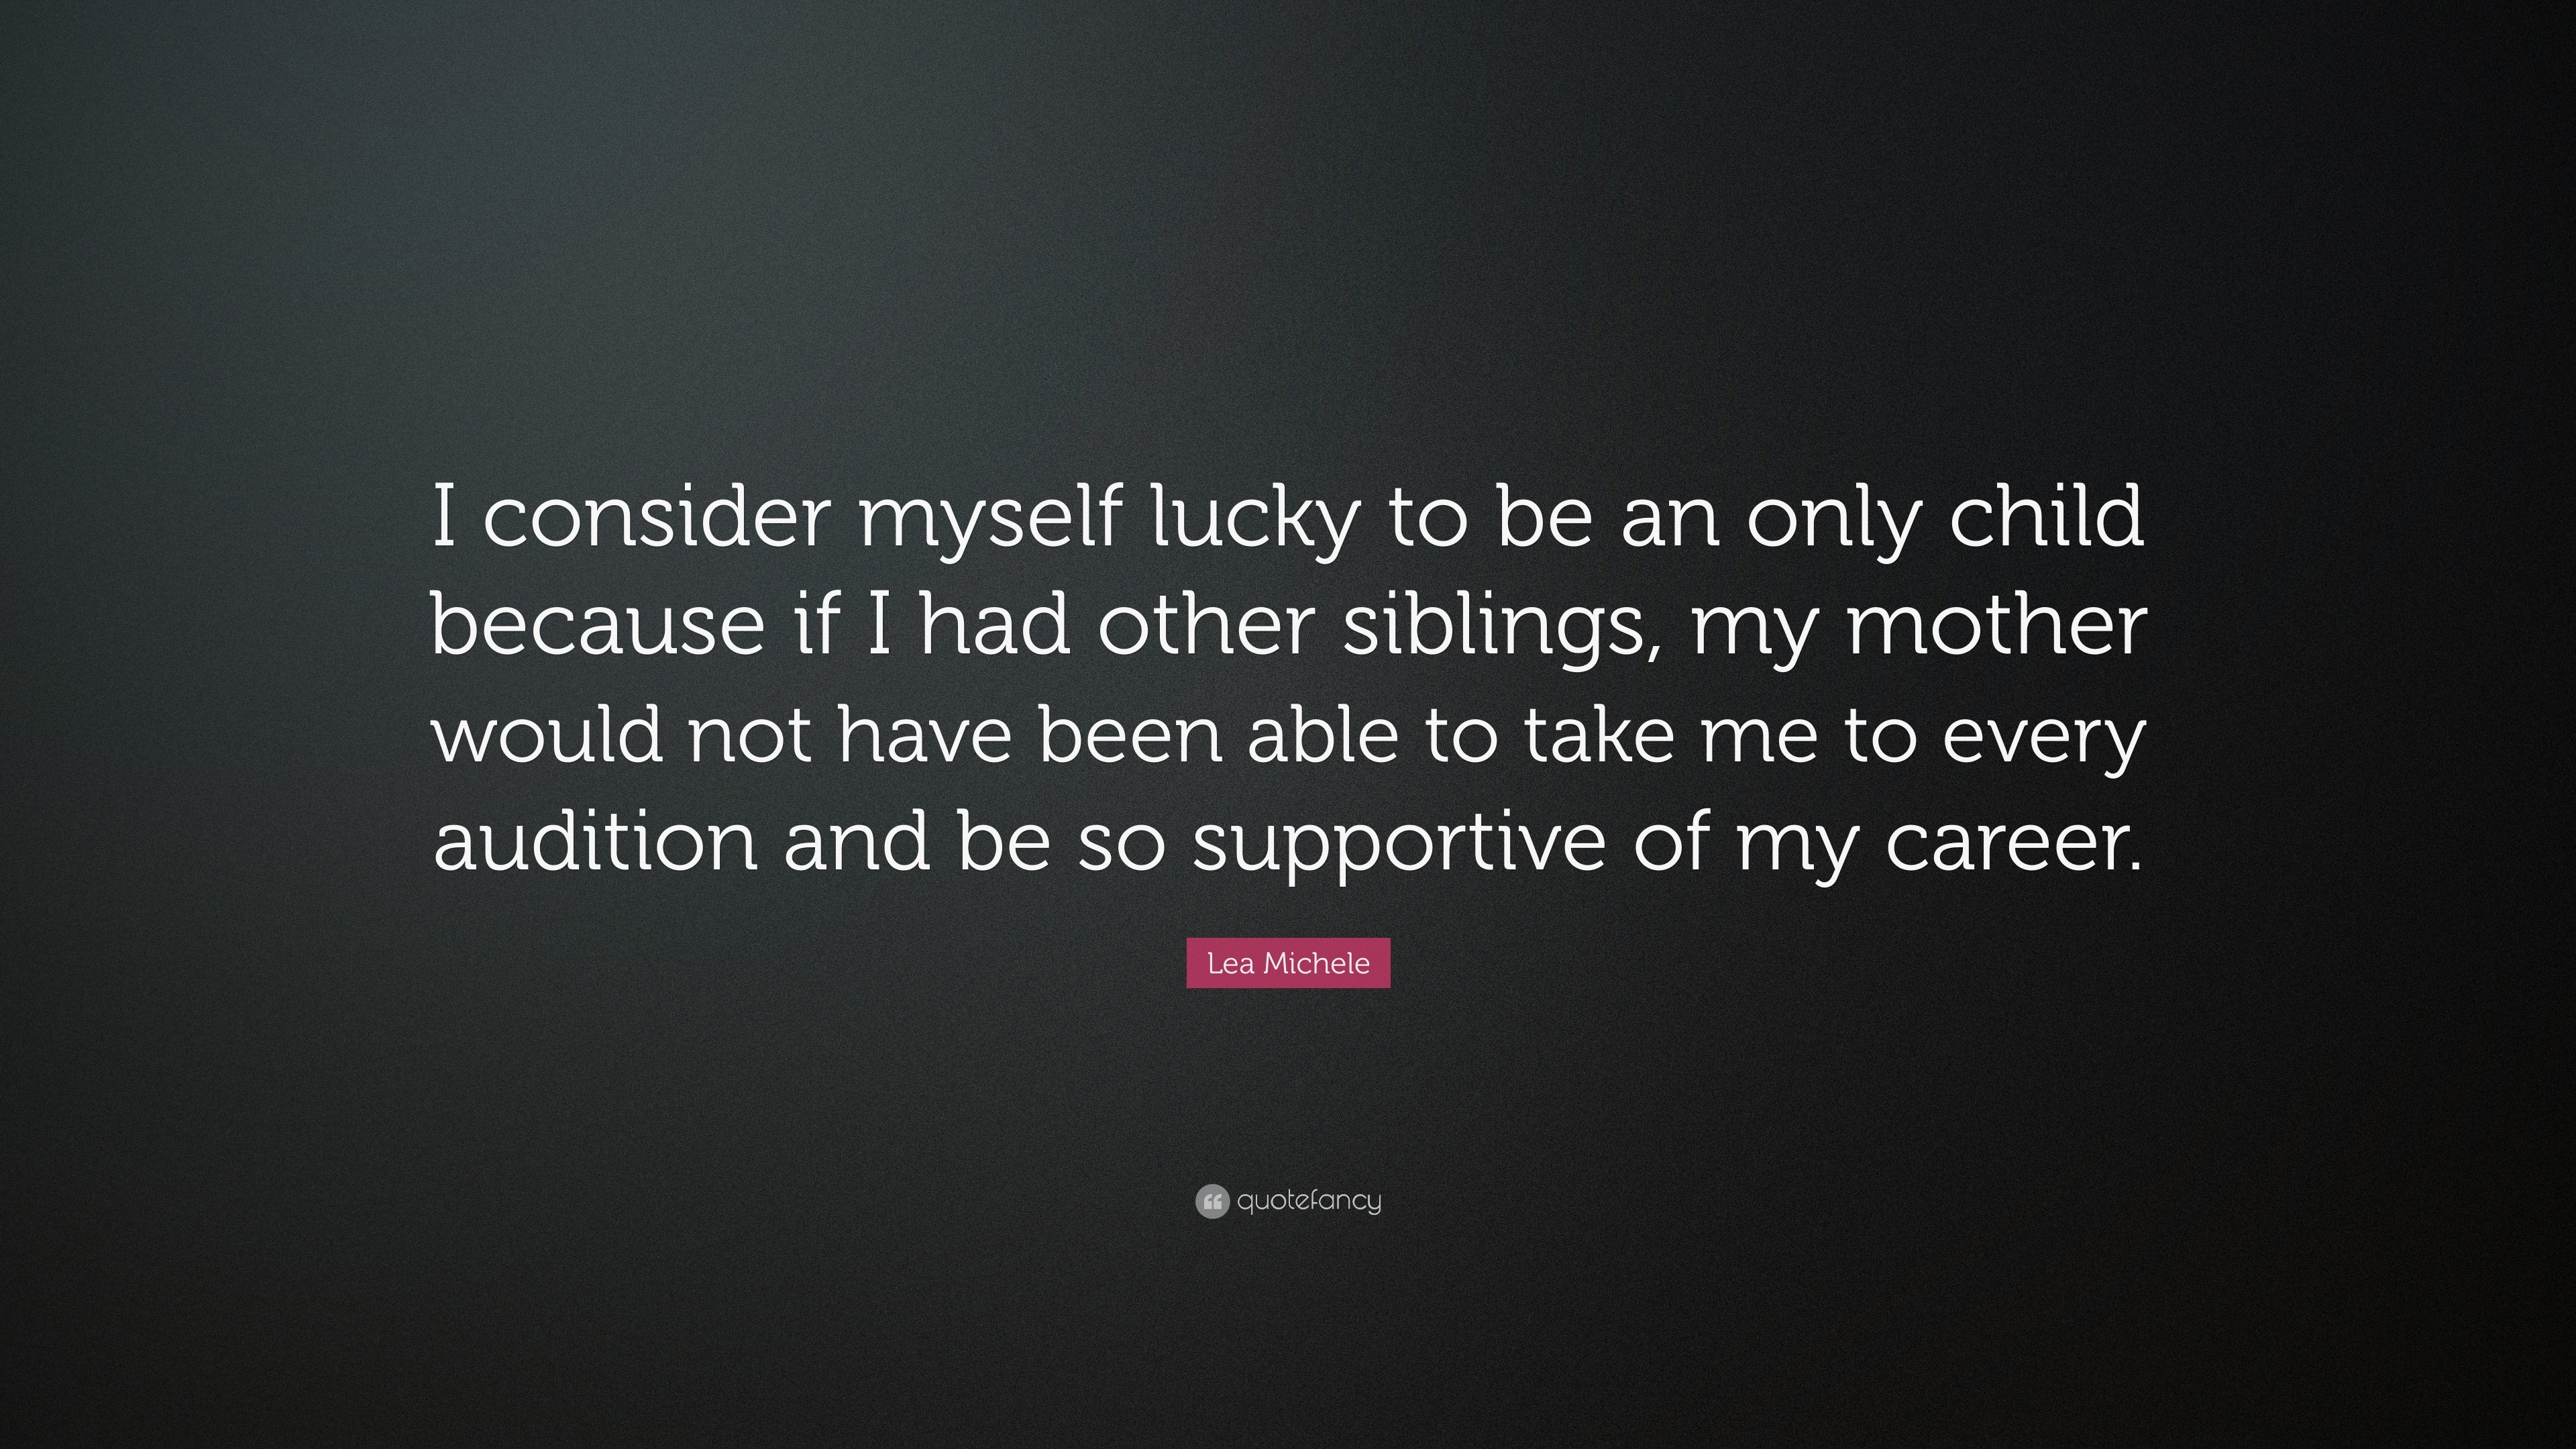 Lea Michele Quote: “I Consider Myself Lucky To Be An Only Child Because If I Had Other Siblings, My Mother Would Not Have Been Able To Take ...”